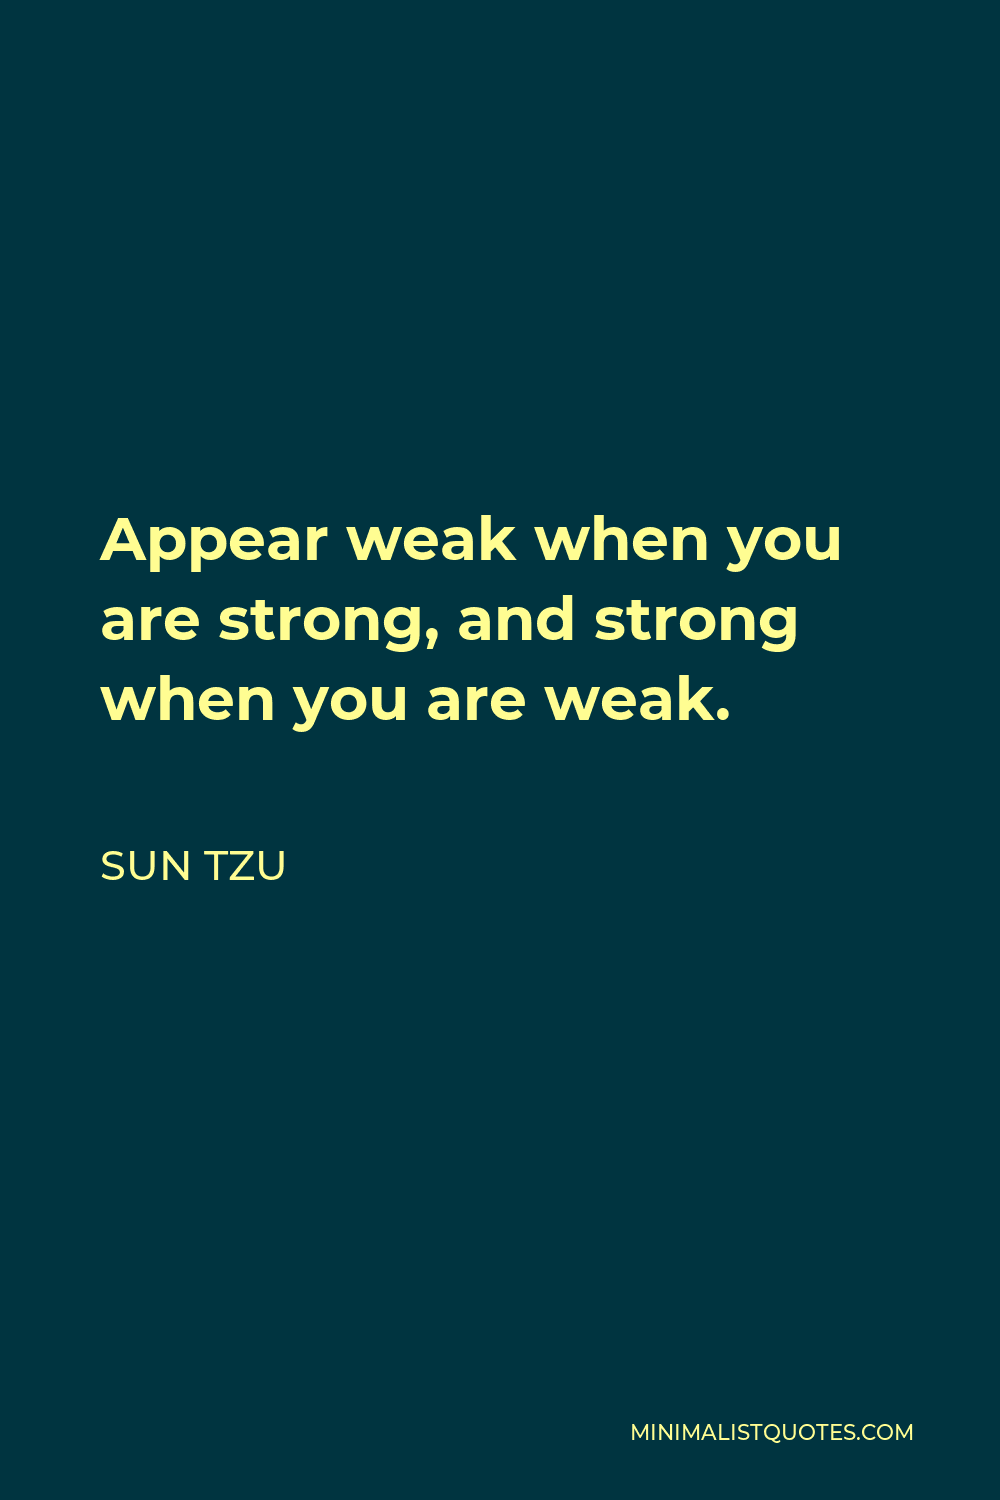 Sun Tzu Quote - Appear weak when you are strong, and strong when you are weak.